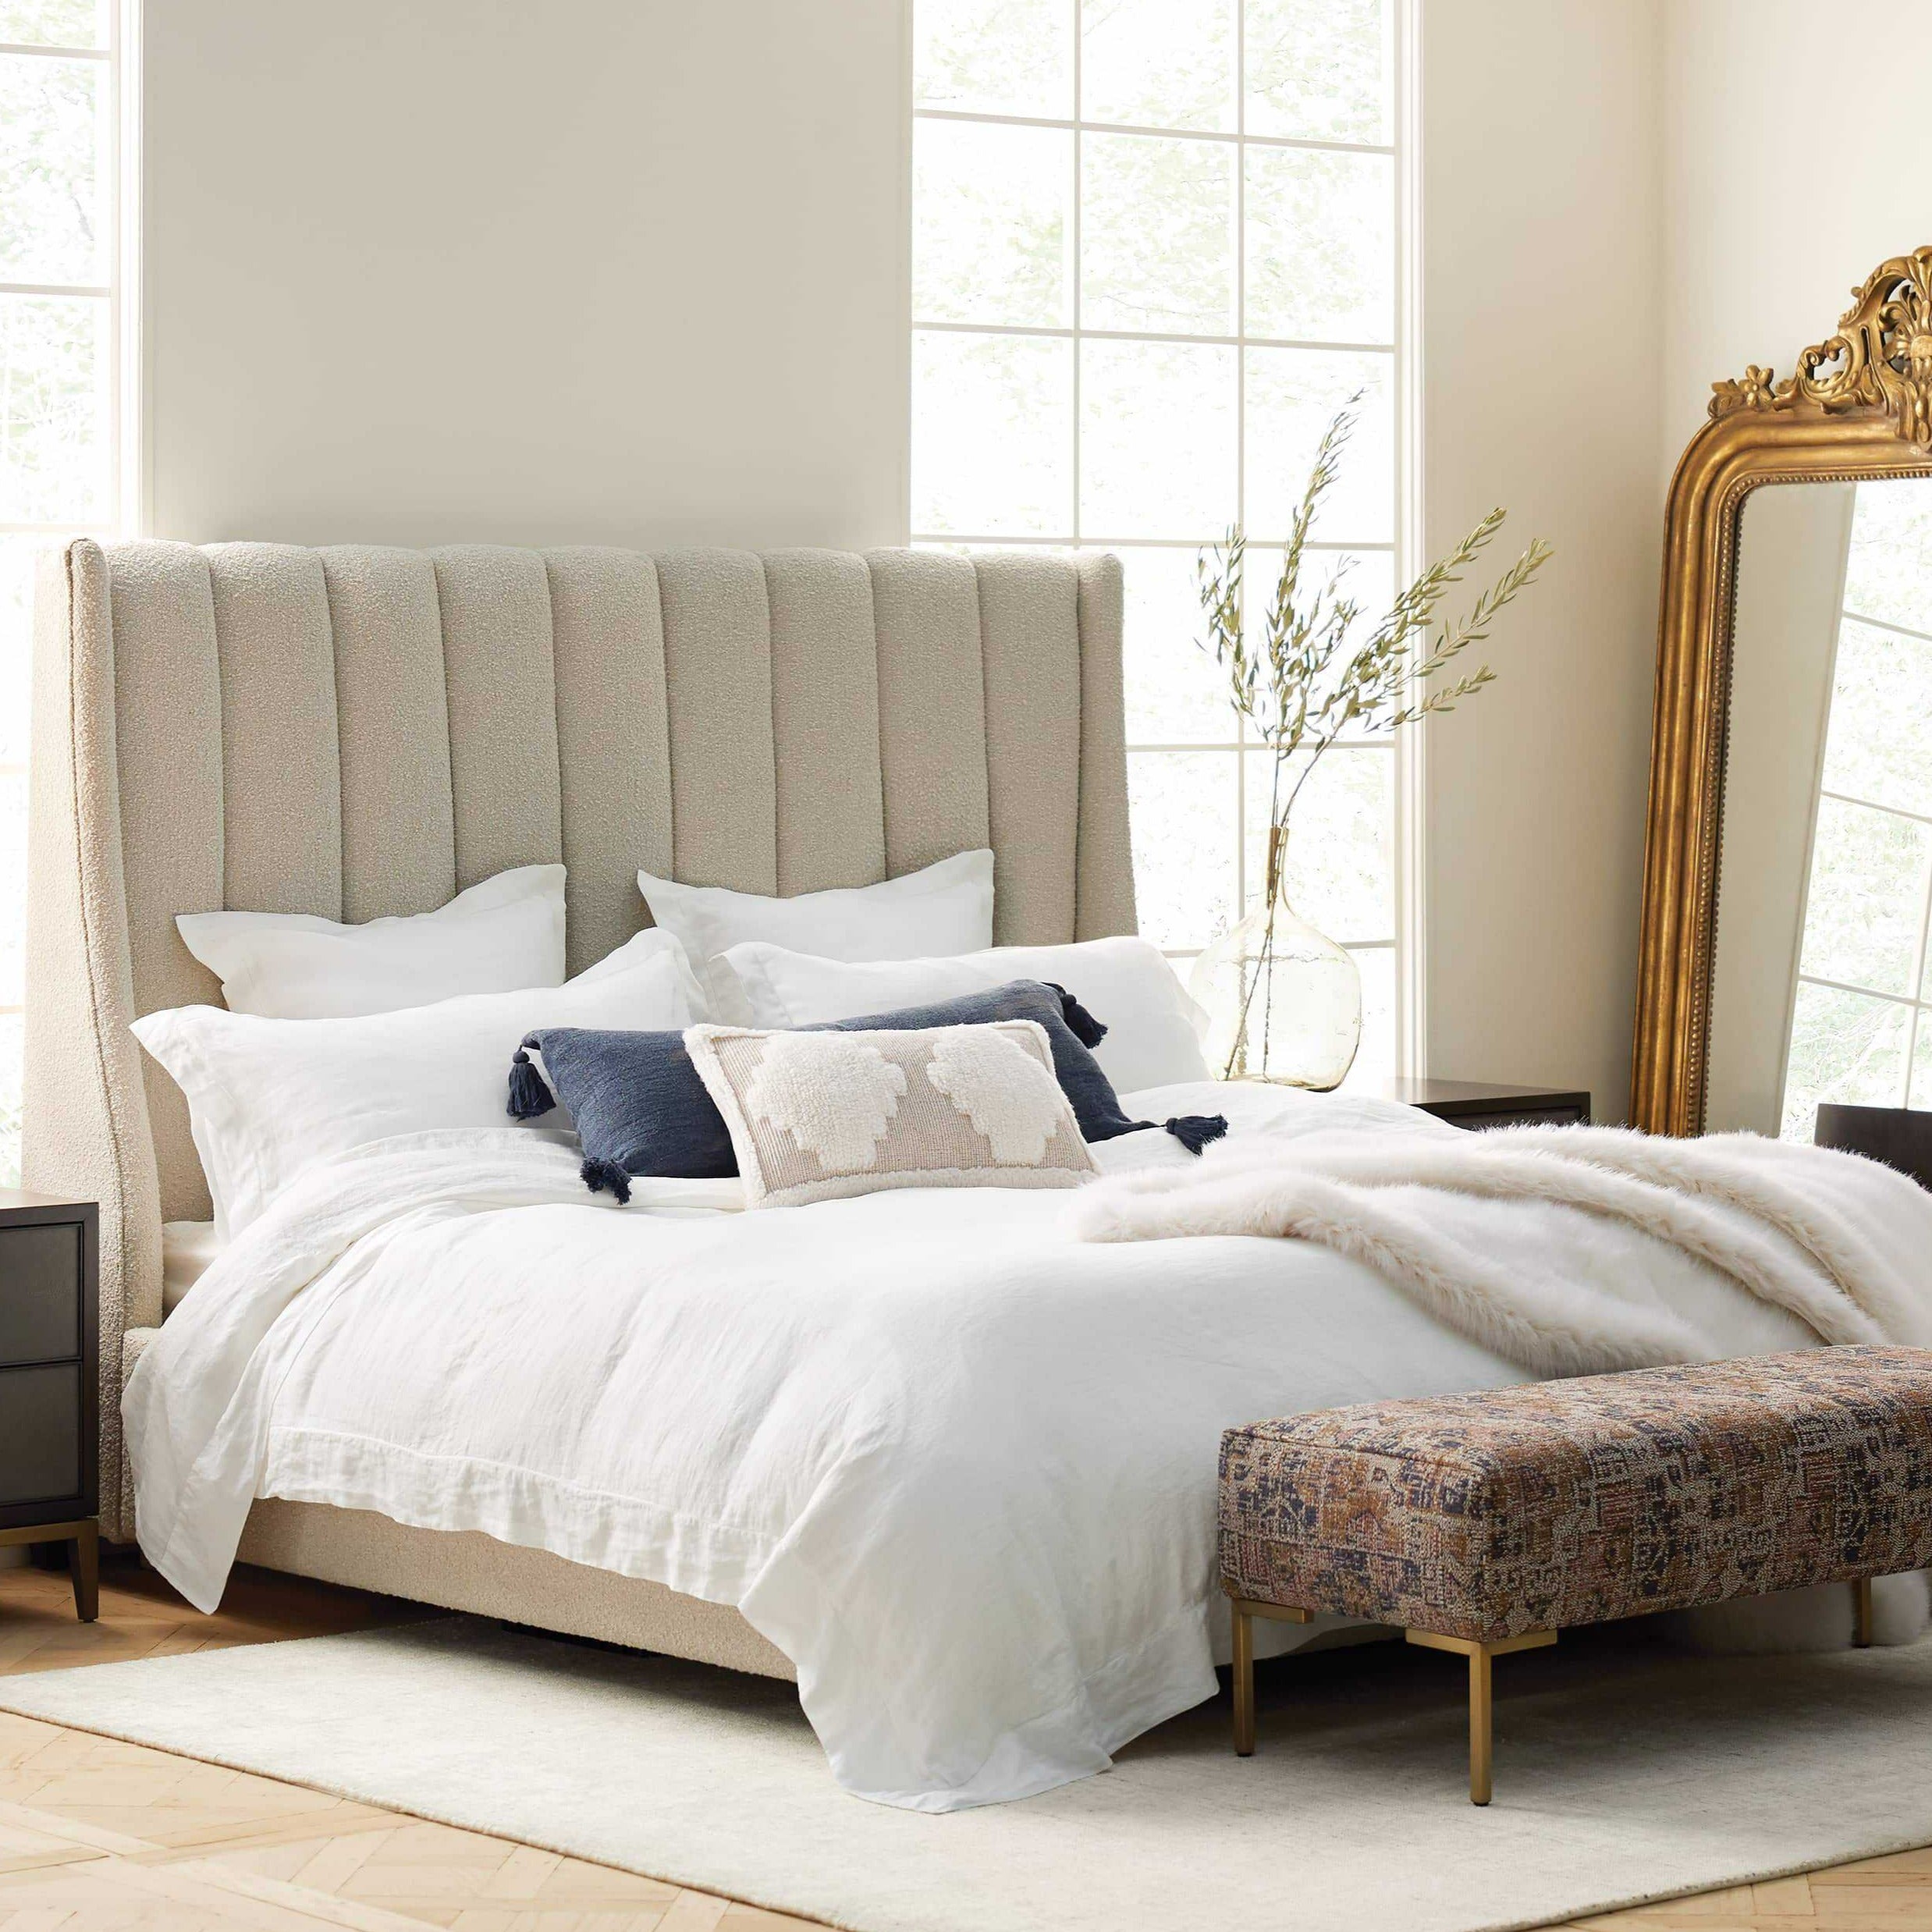 Hayworth WingBack Upholstered Bed